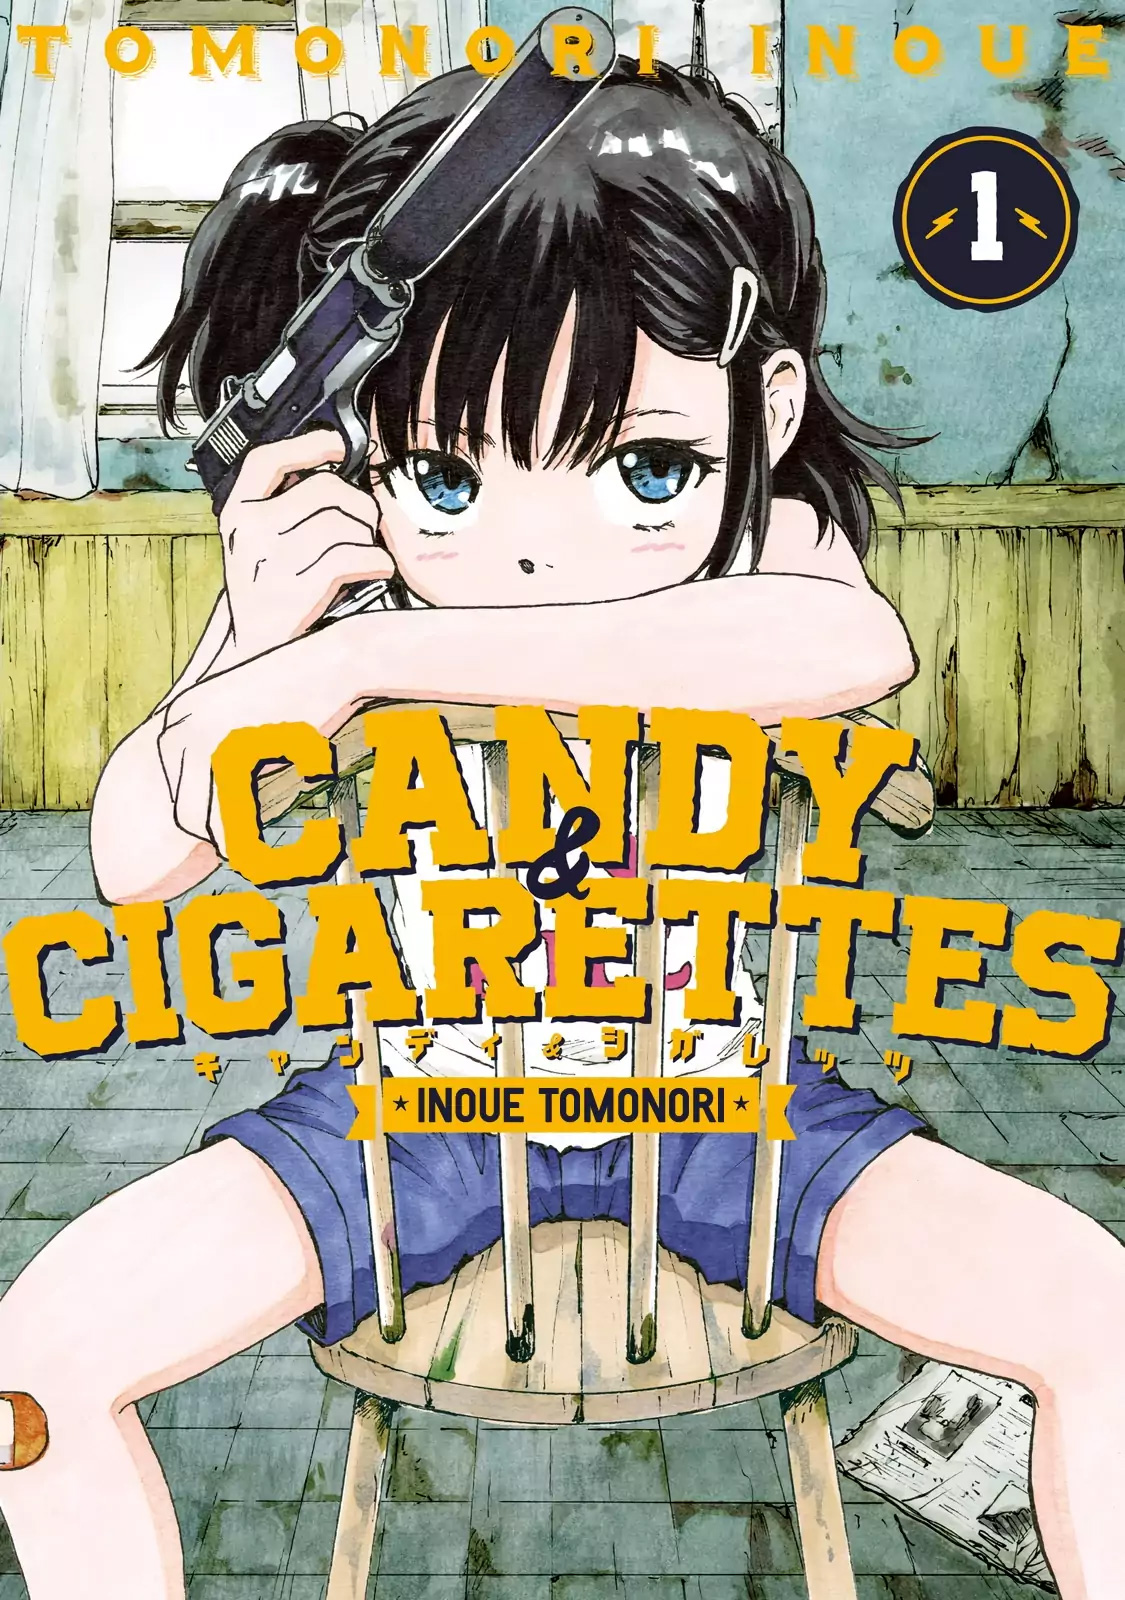 Candy & Cigarettes Chapter 1